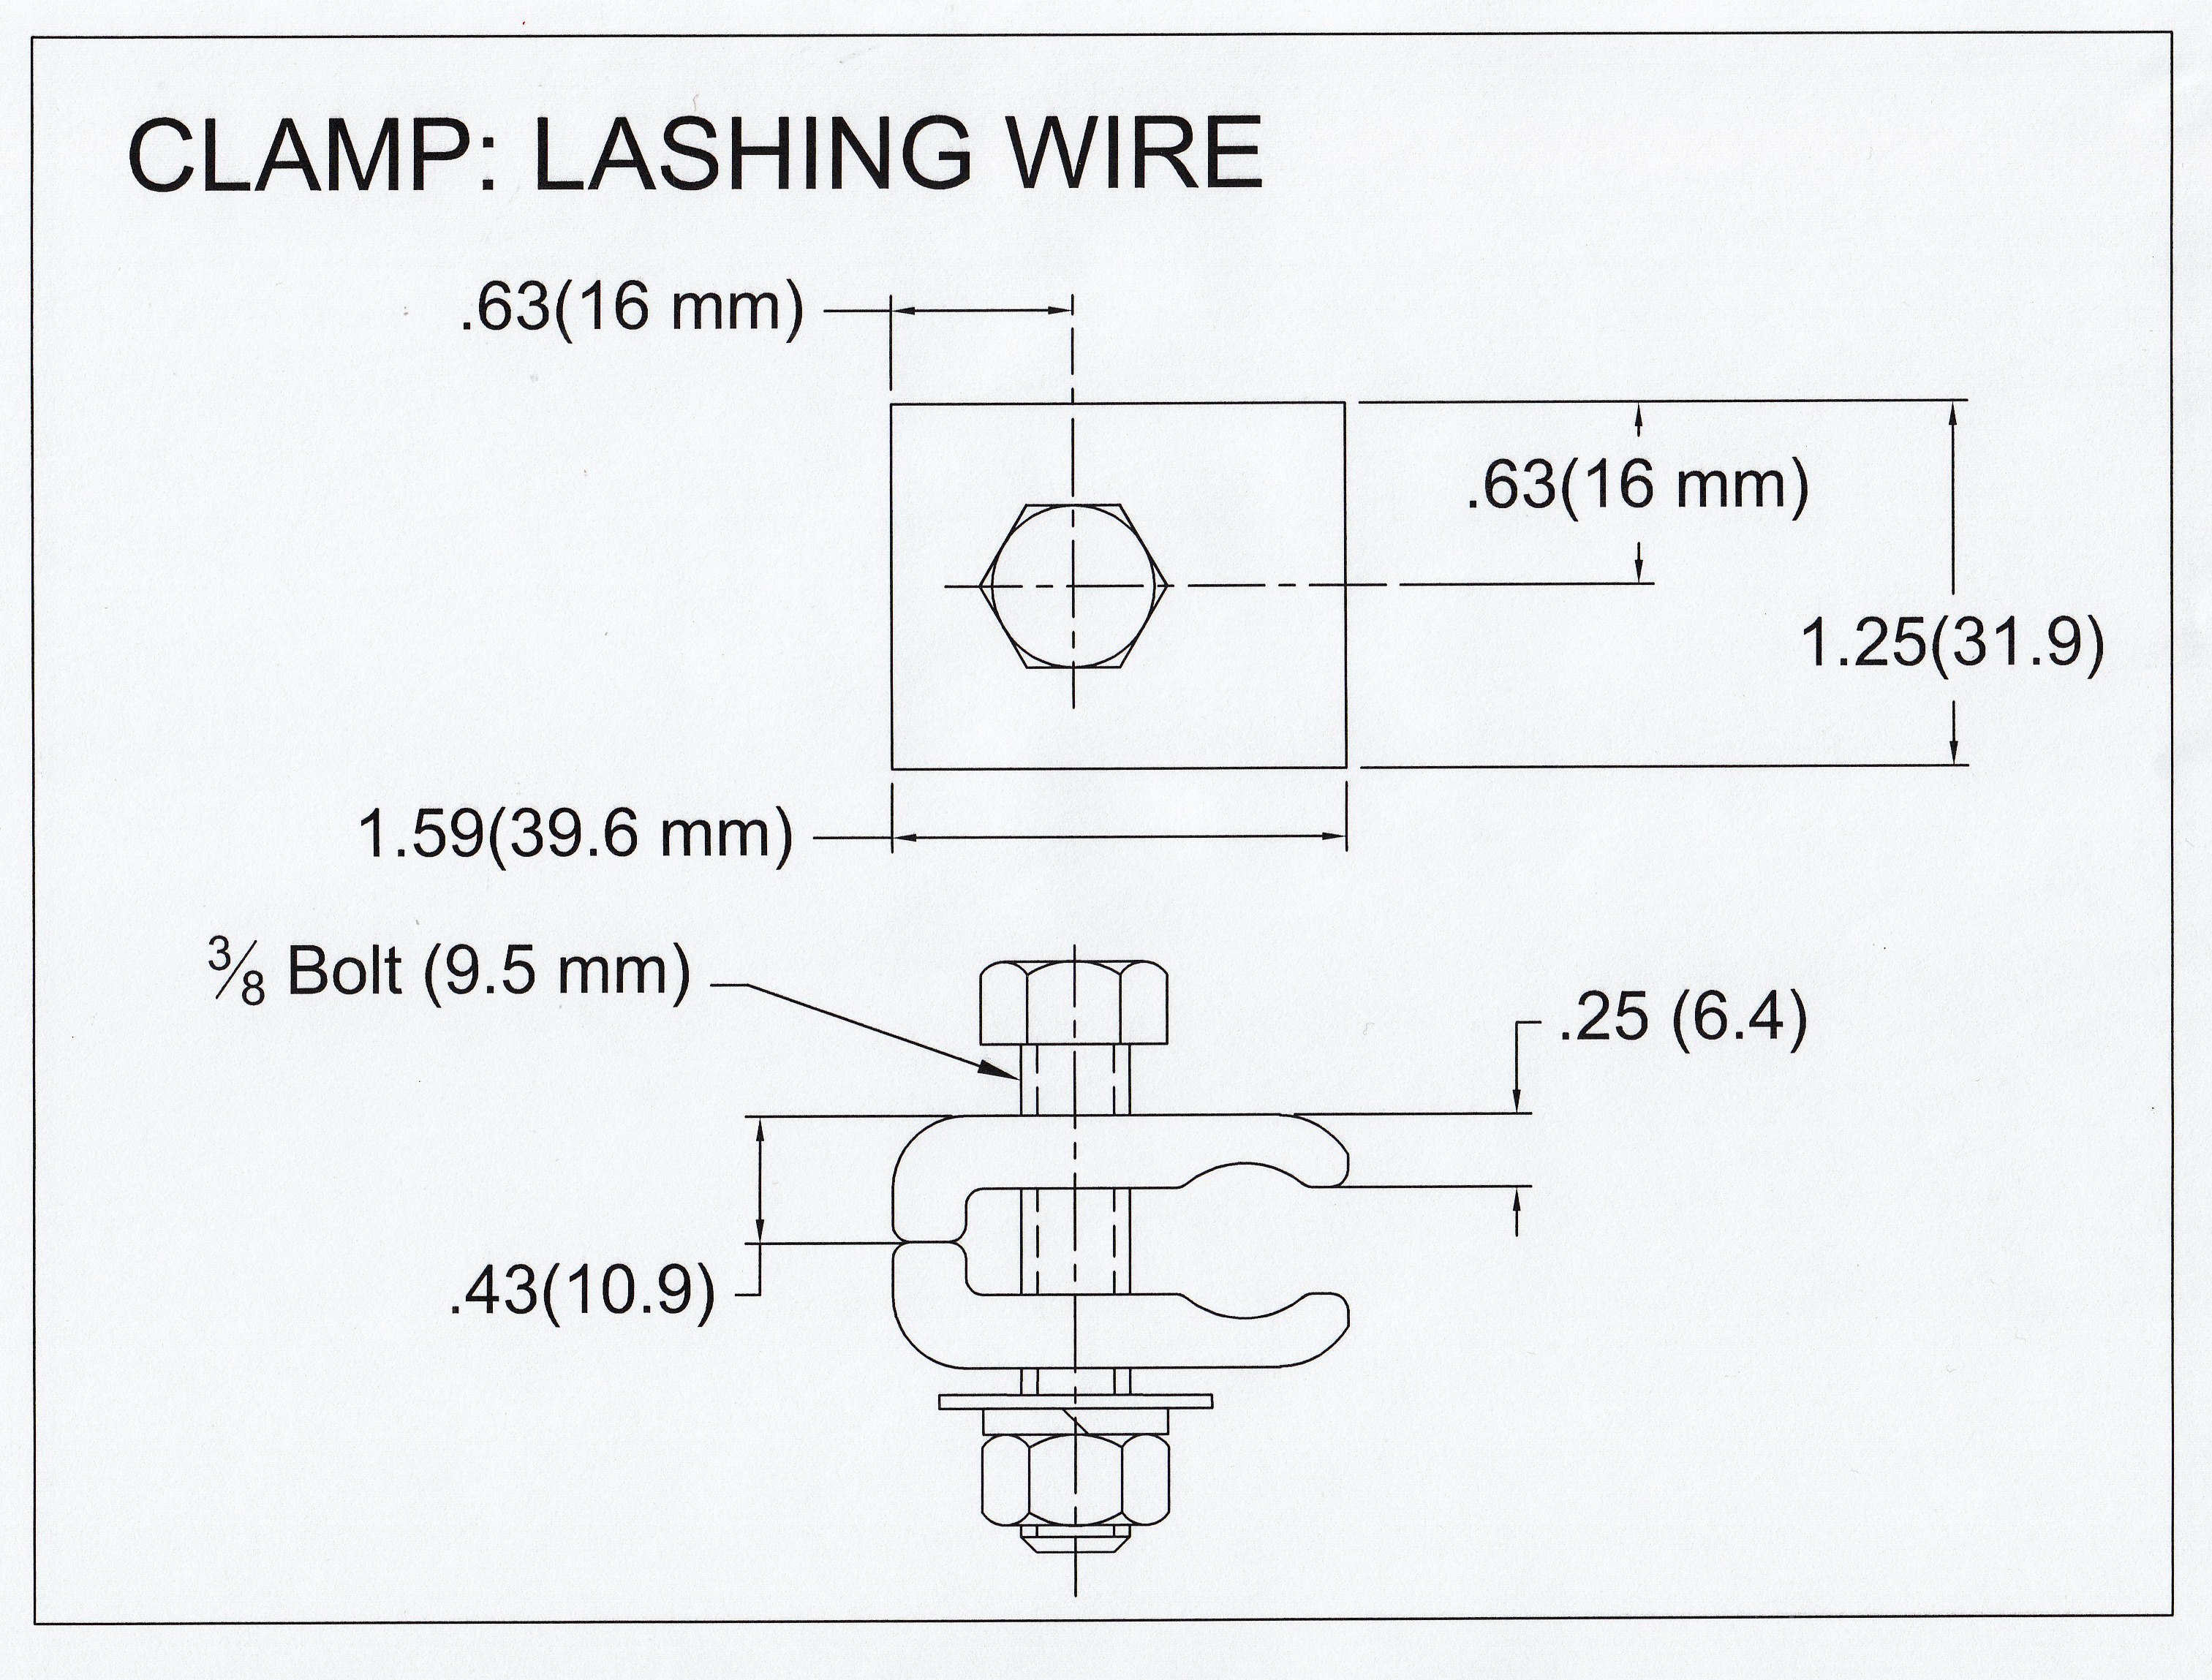 CLAMP LASHING WIRE PAGE 1-11-2.jpg